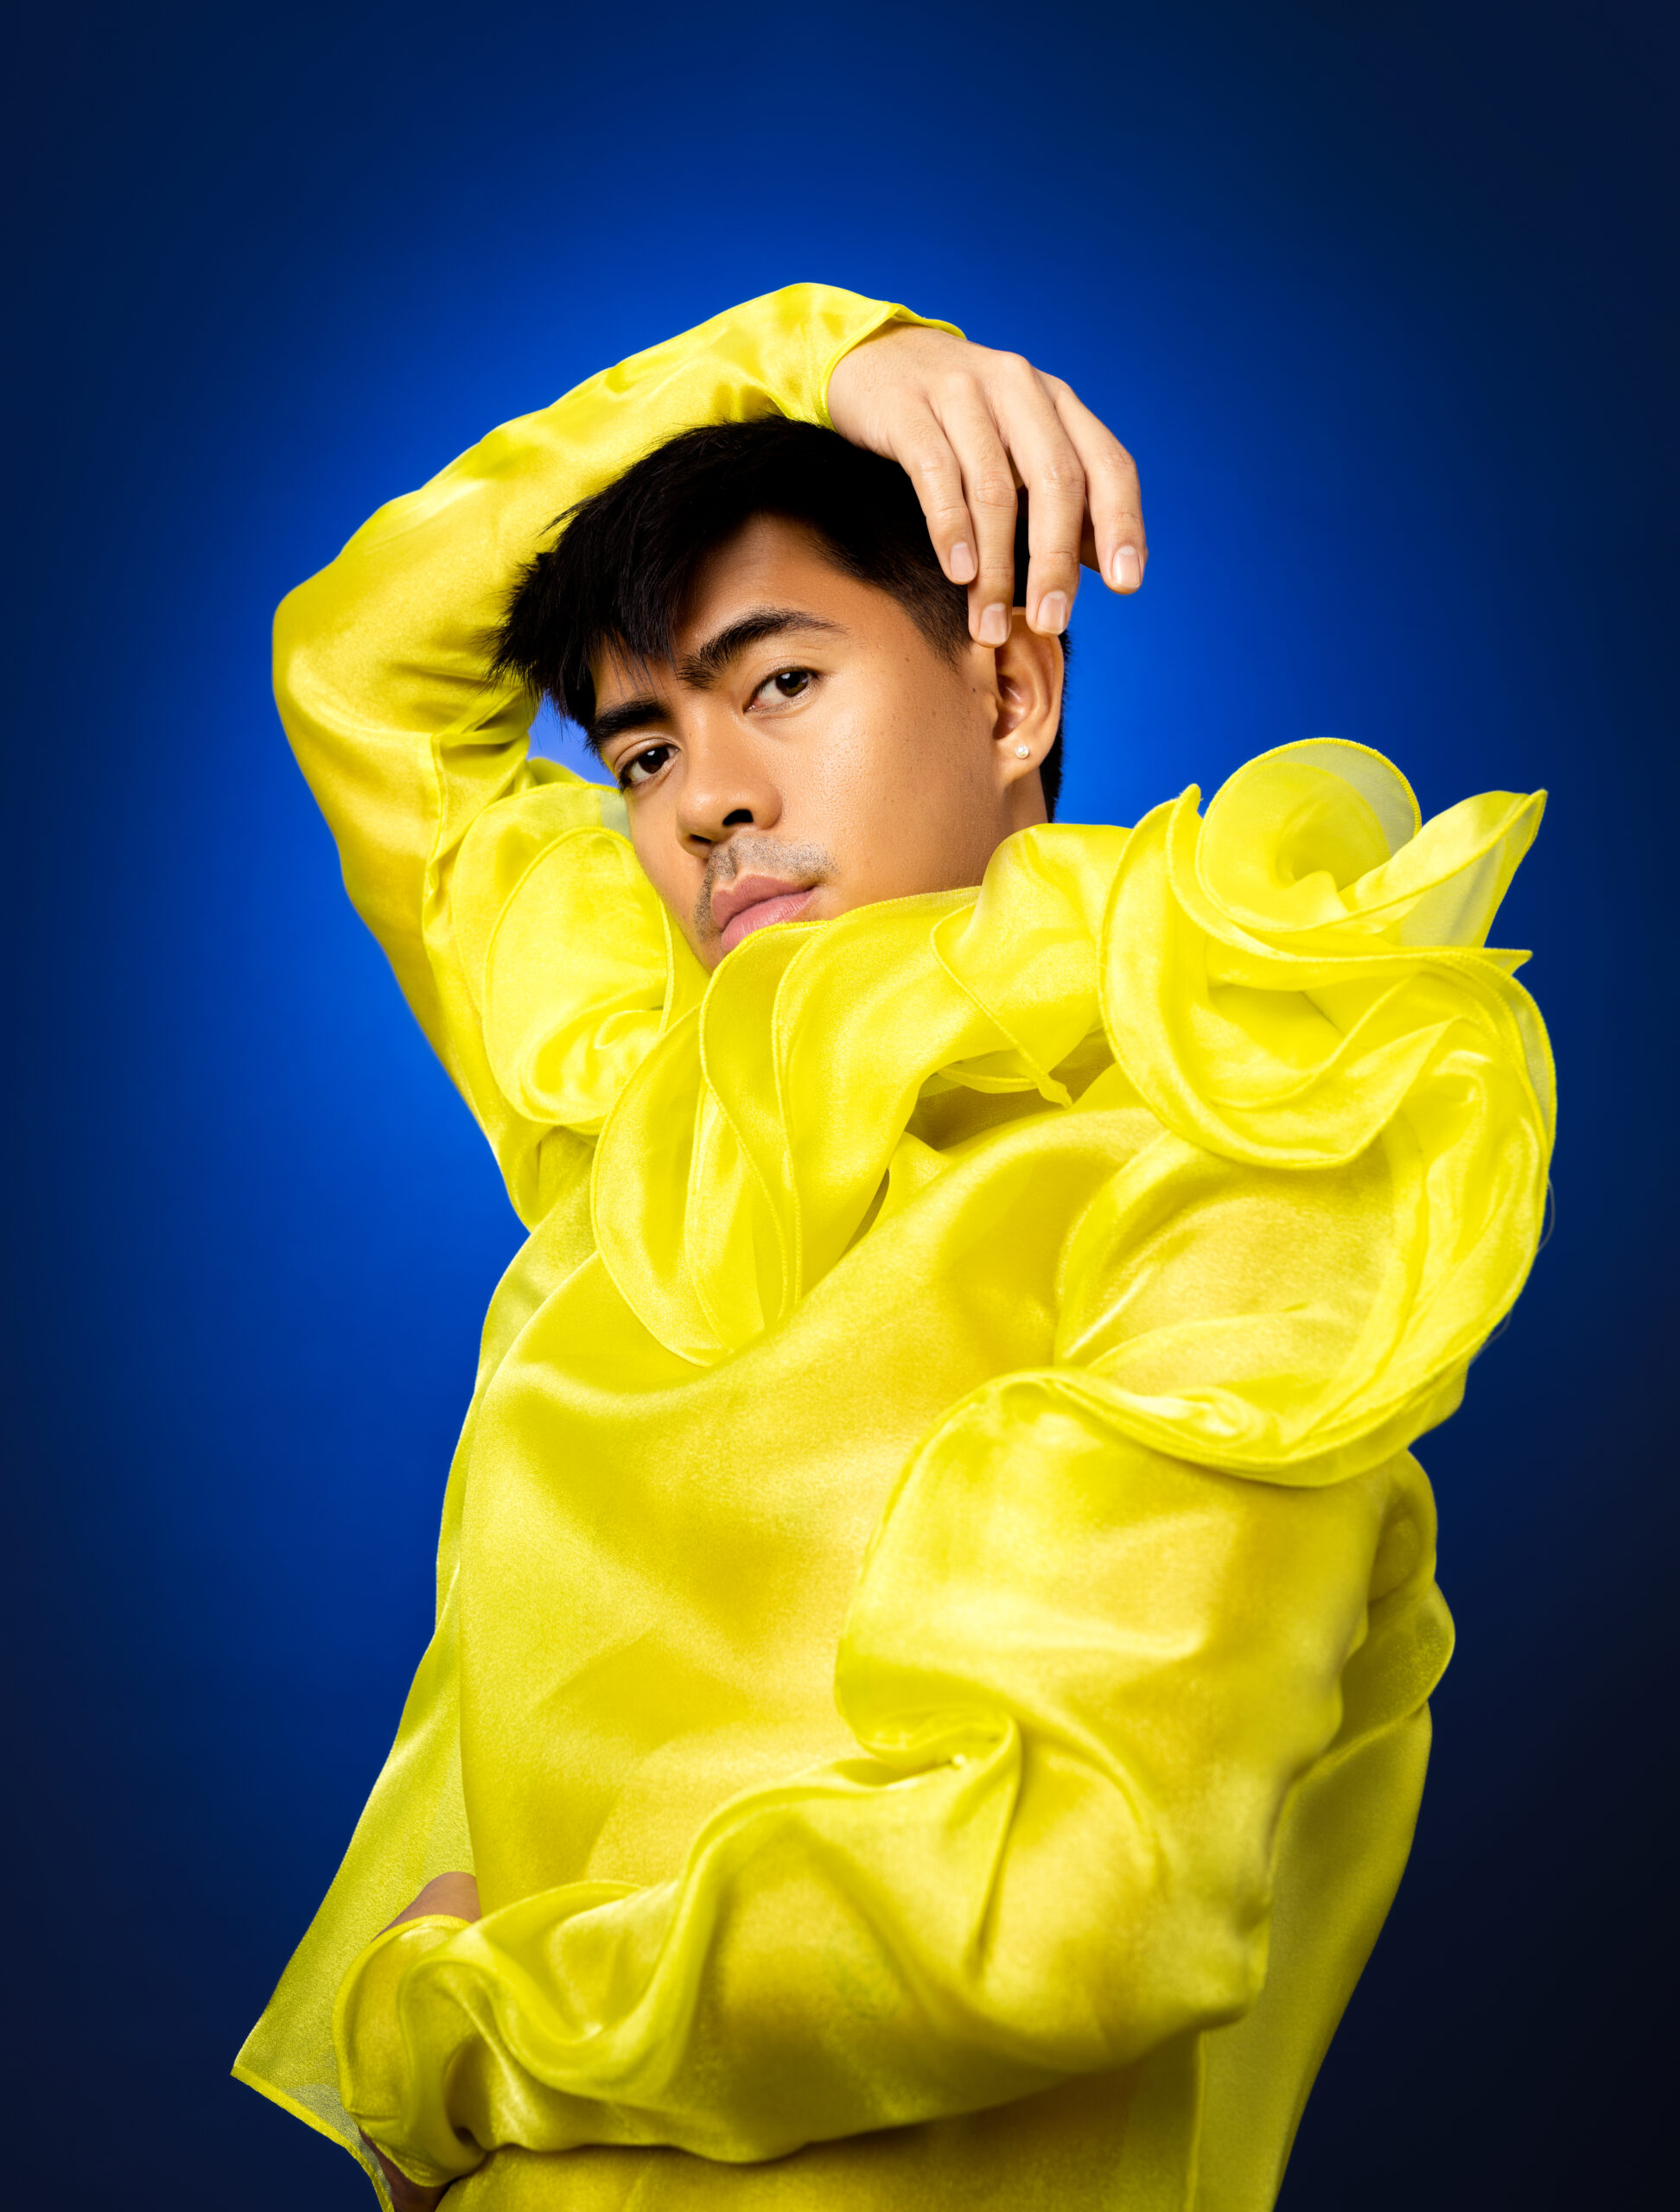 Asian model posing with one arm above head in a bright yellow top against a blue backdrop.